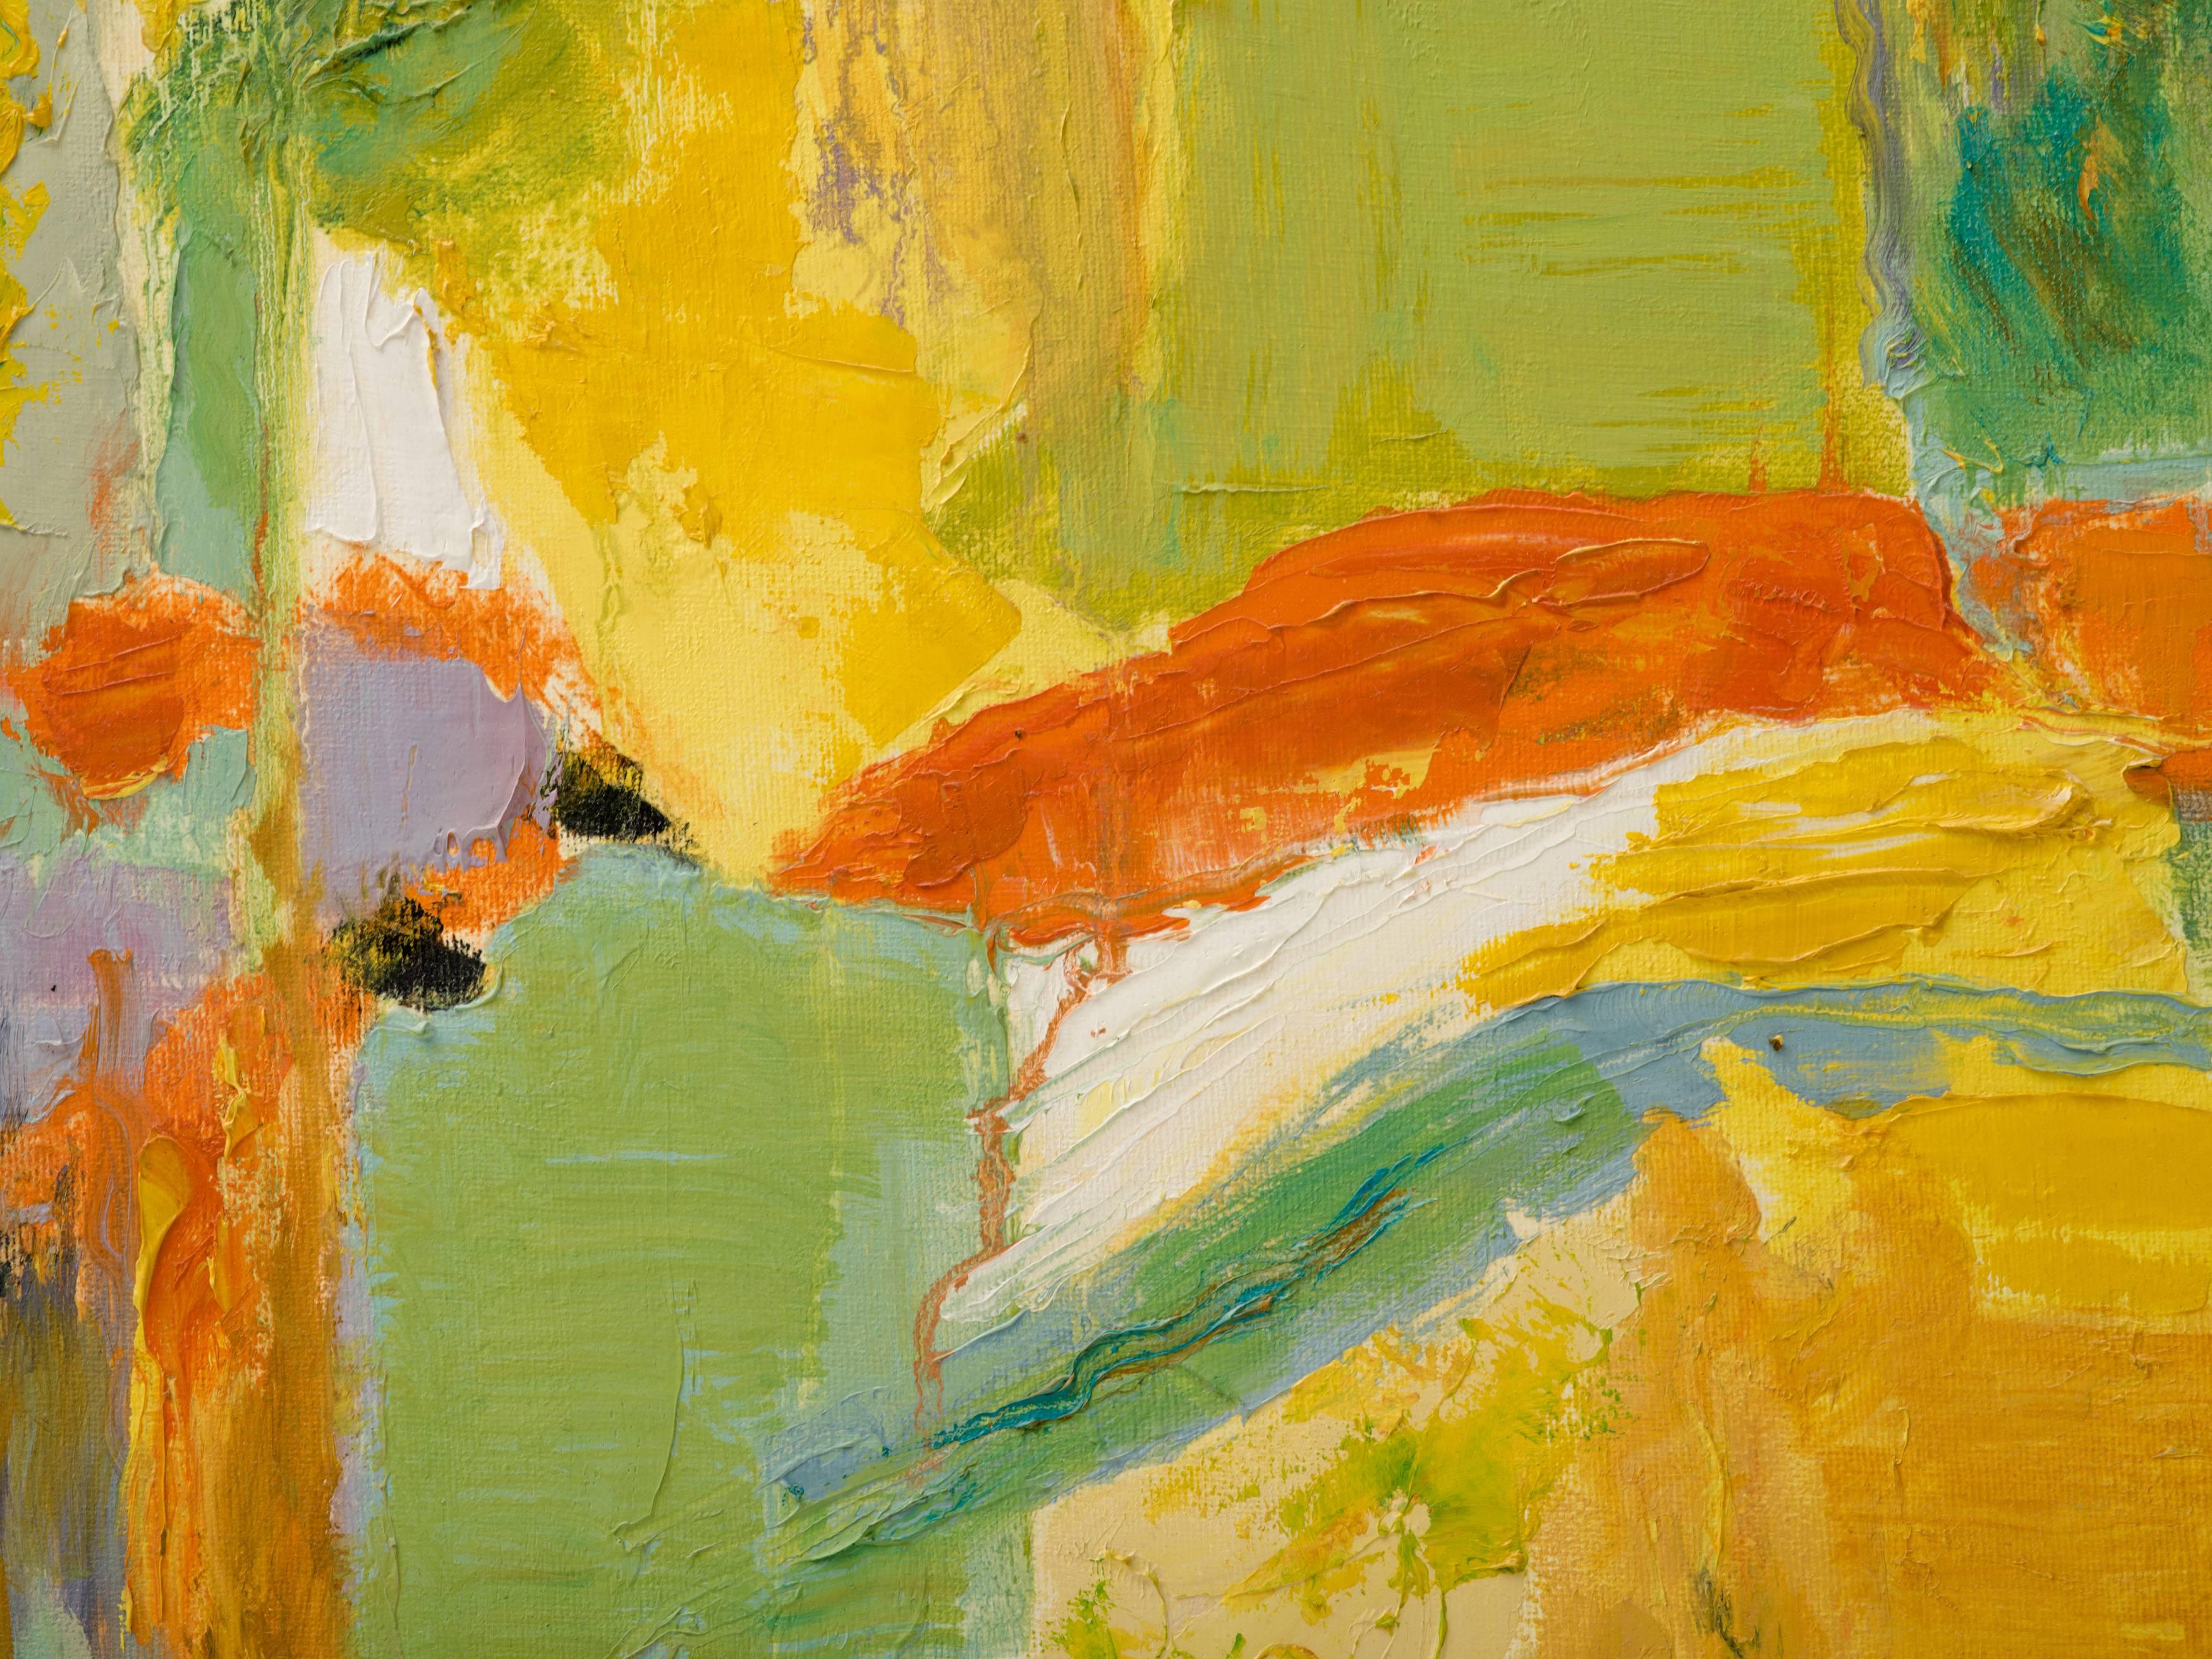 Beautiful abstract modern painting with green, yellow and orange hues. Hamptons estate find. Unsigned.